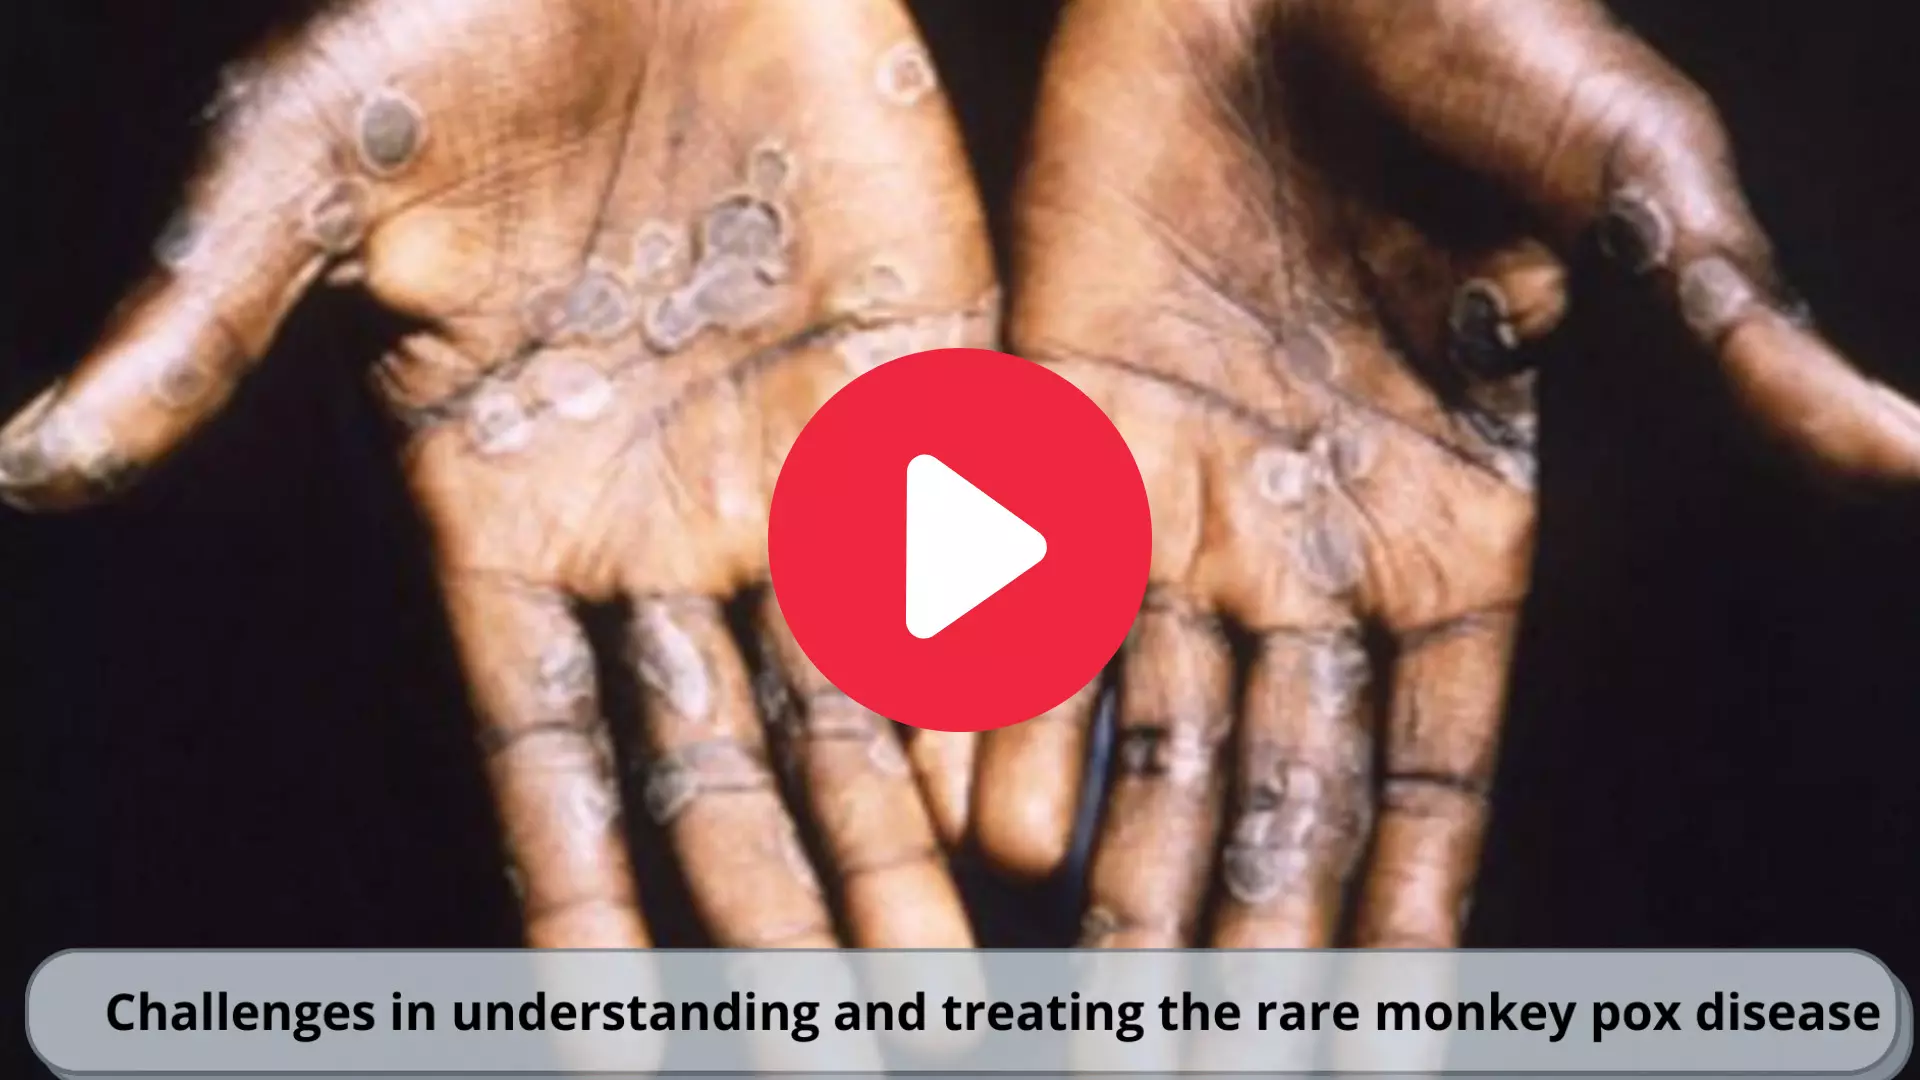 Challenges in understanding and treating the rare monkey pox disease